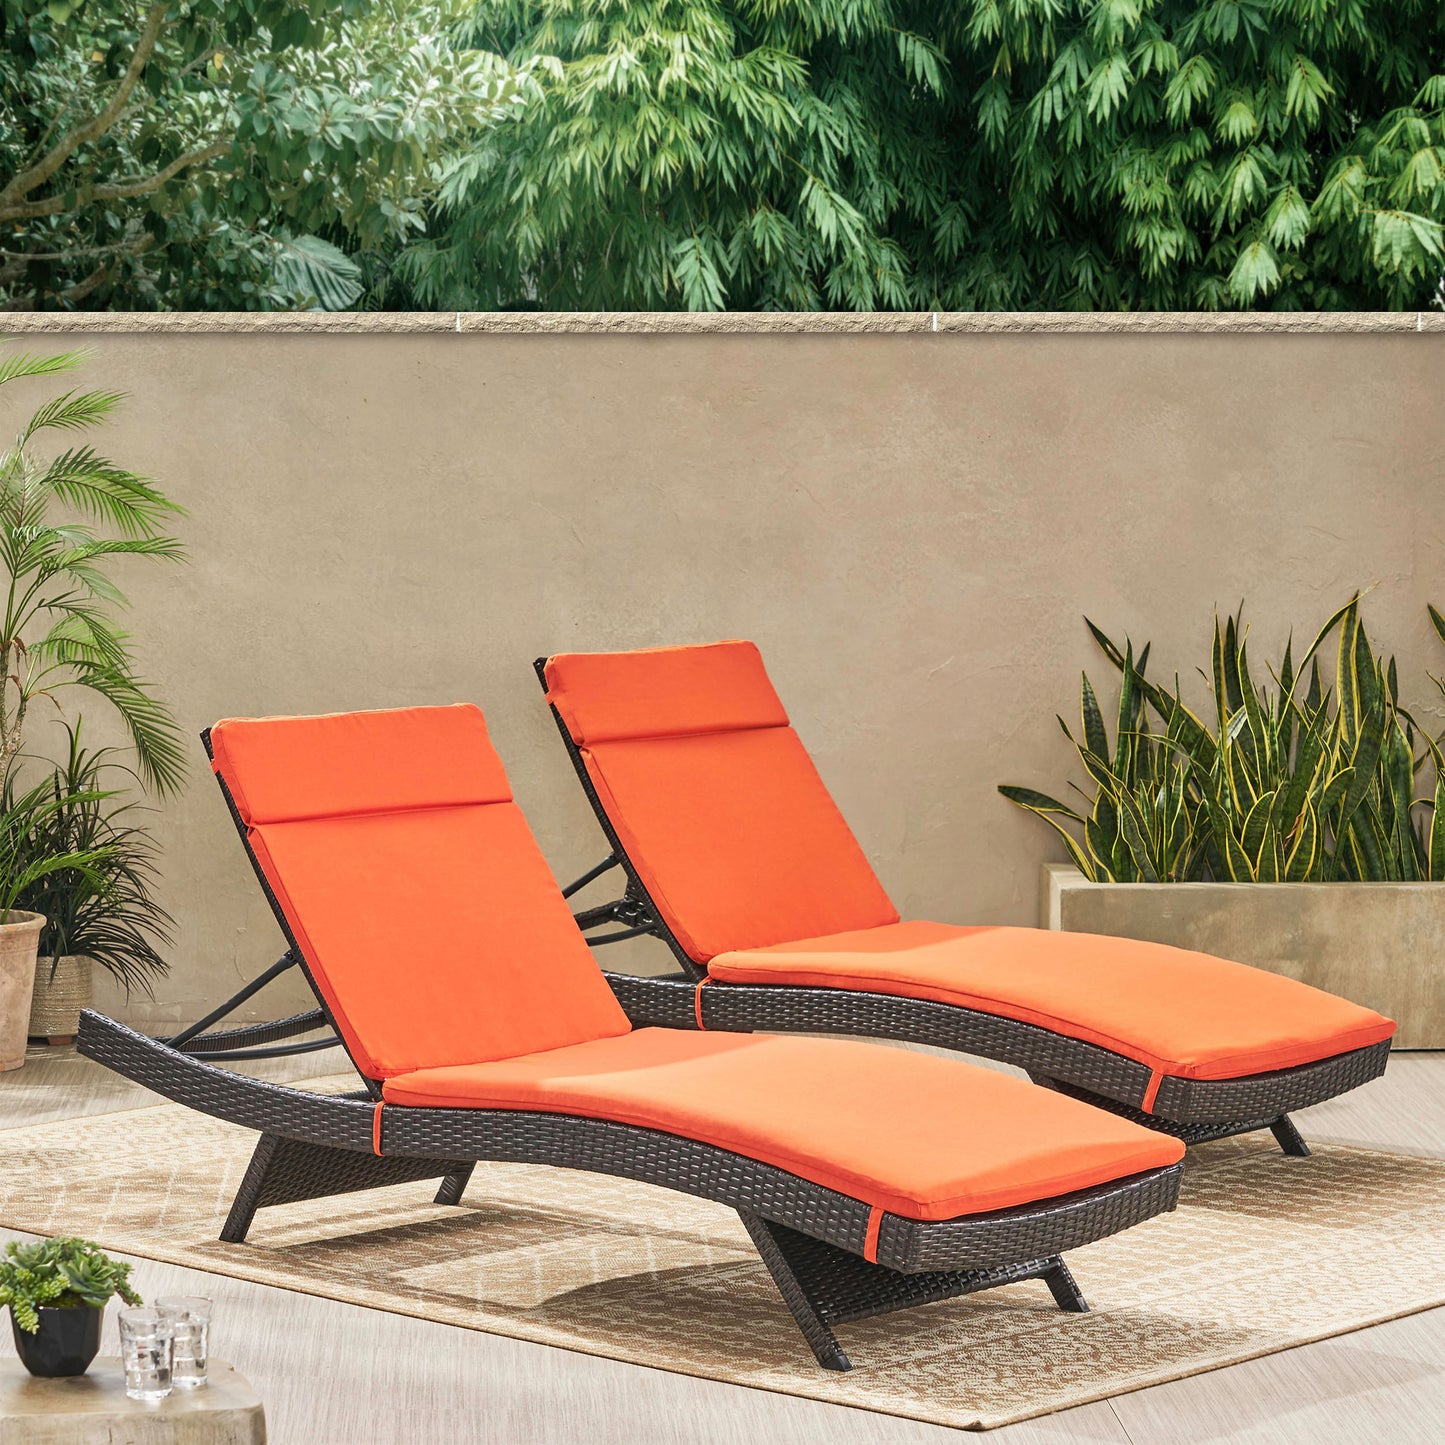 Savana Outdoor Wicker Lounge with Water Resistant Cushion